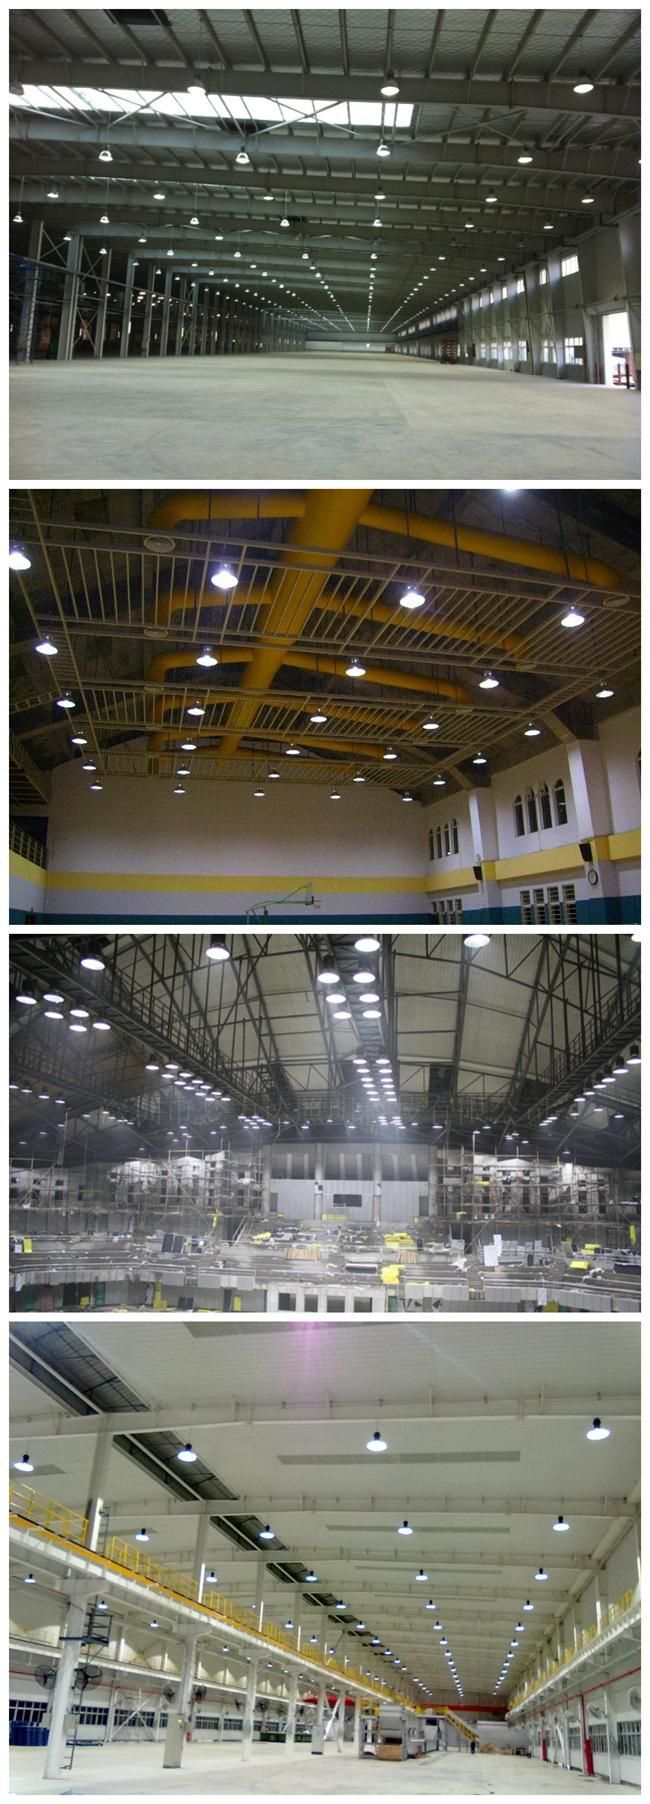 Warehouse Industrial LED High Bay Light with 5 Years Warrranty